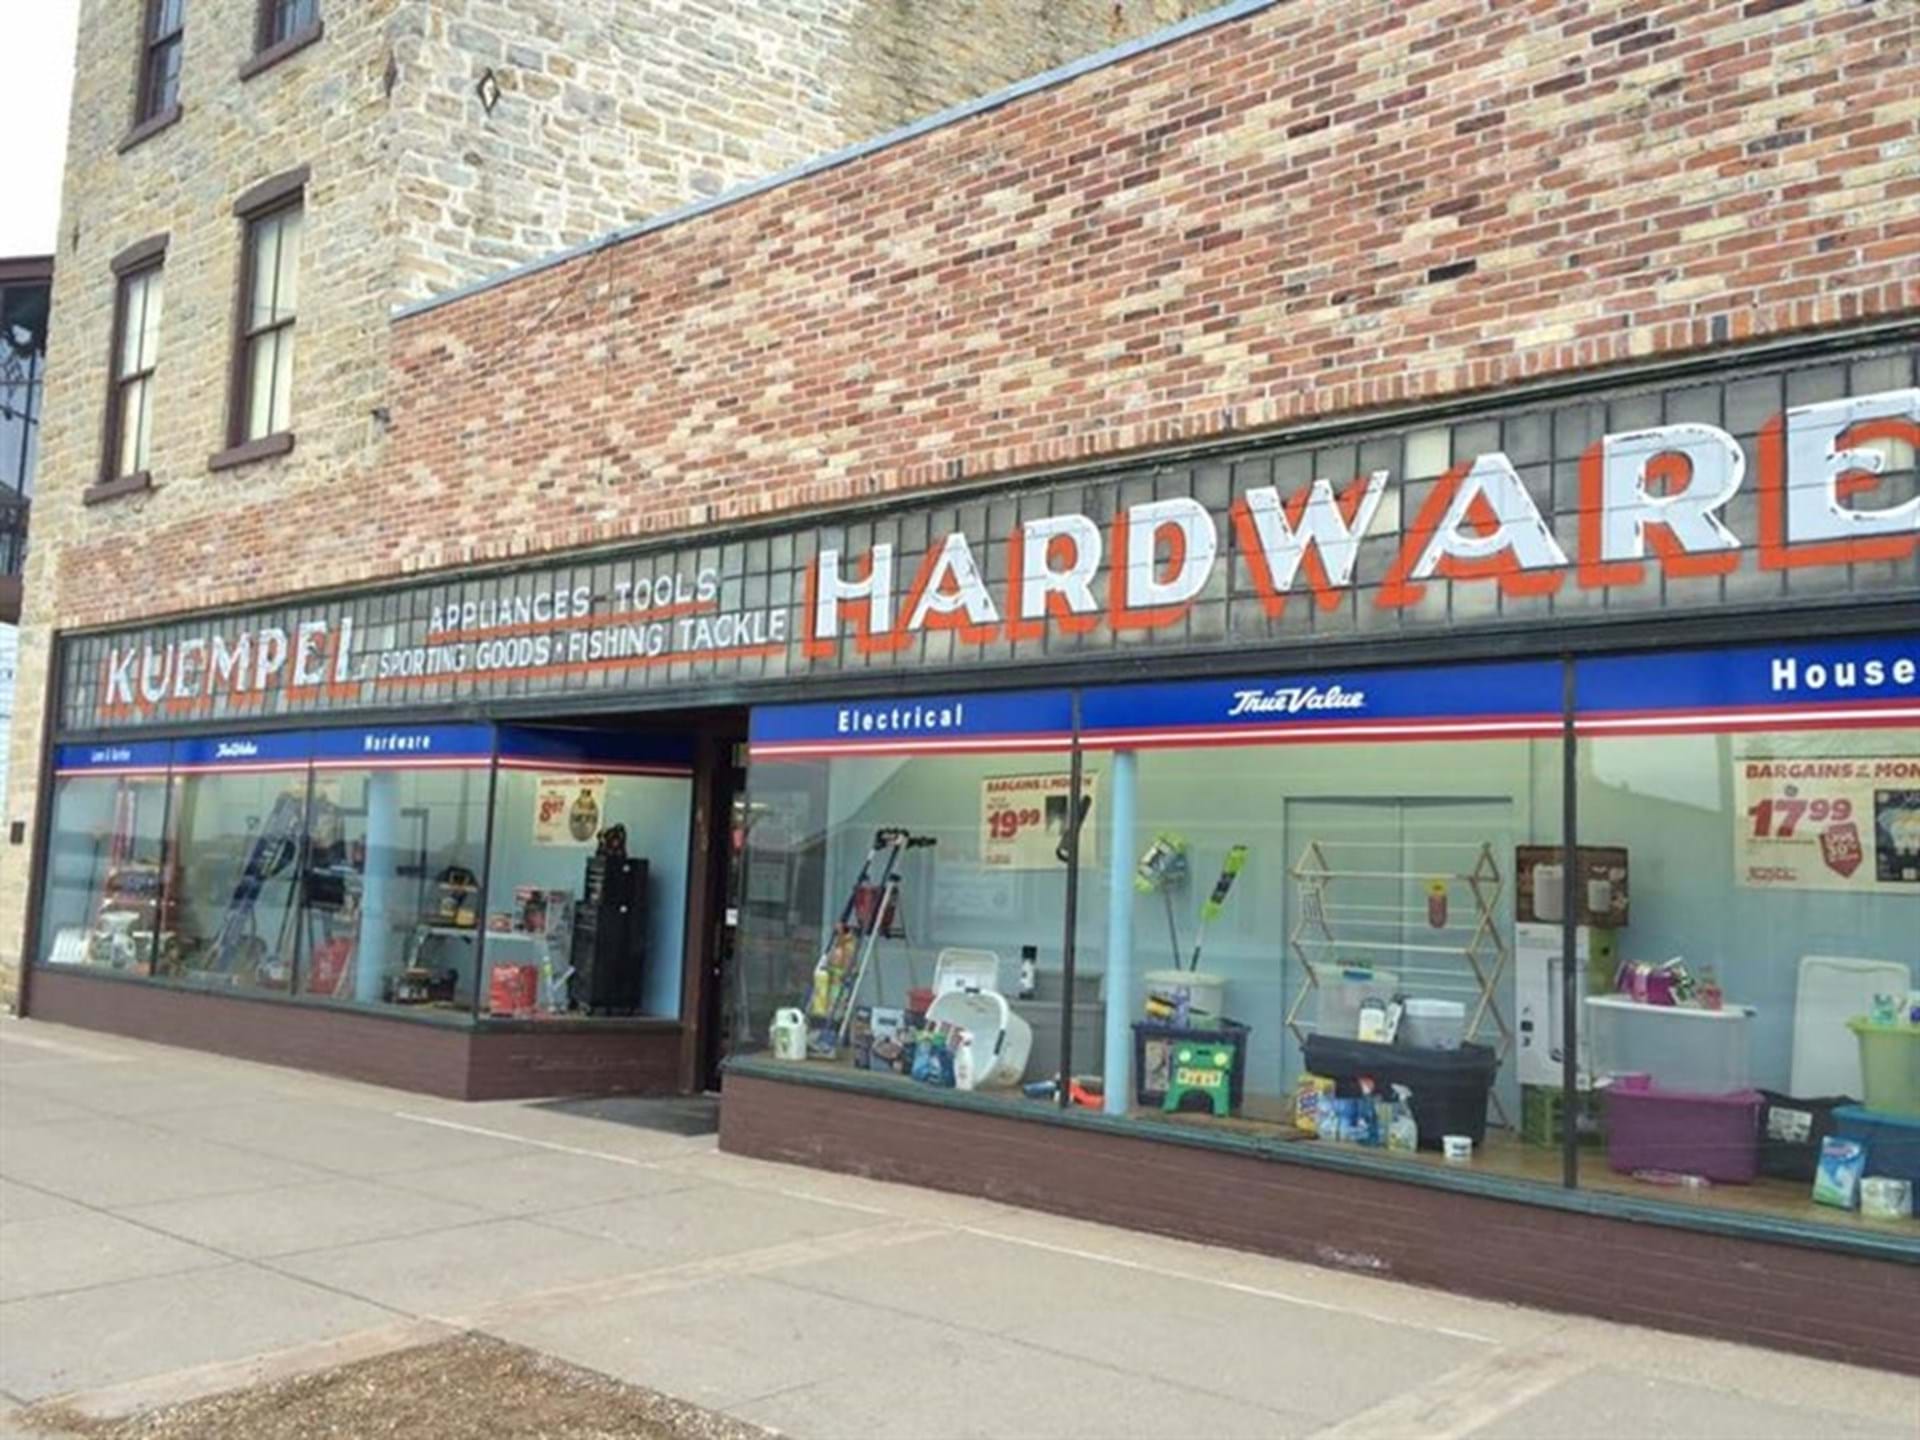 The building has existed as a hardware store since it was built in 1856